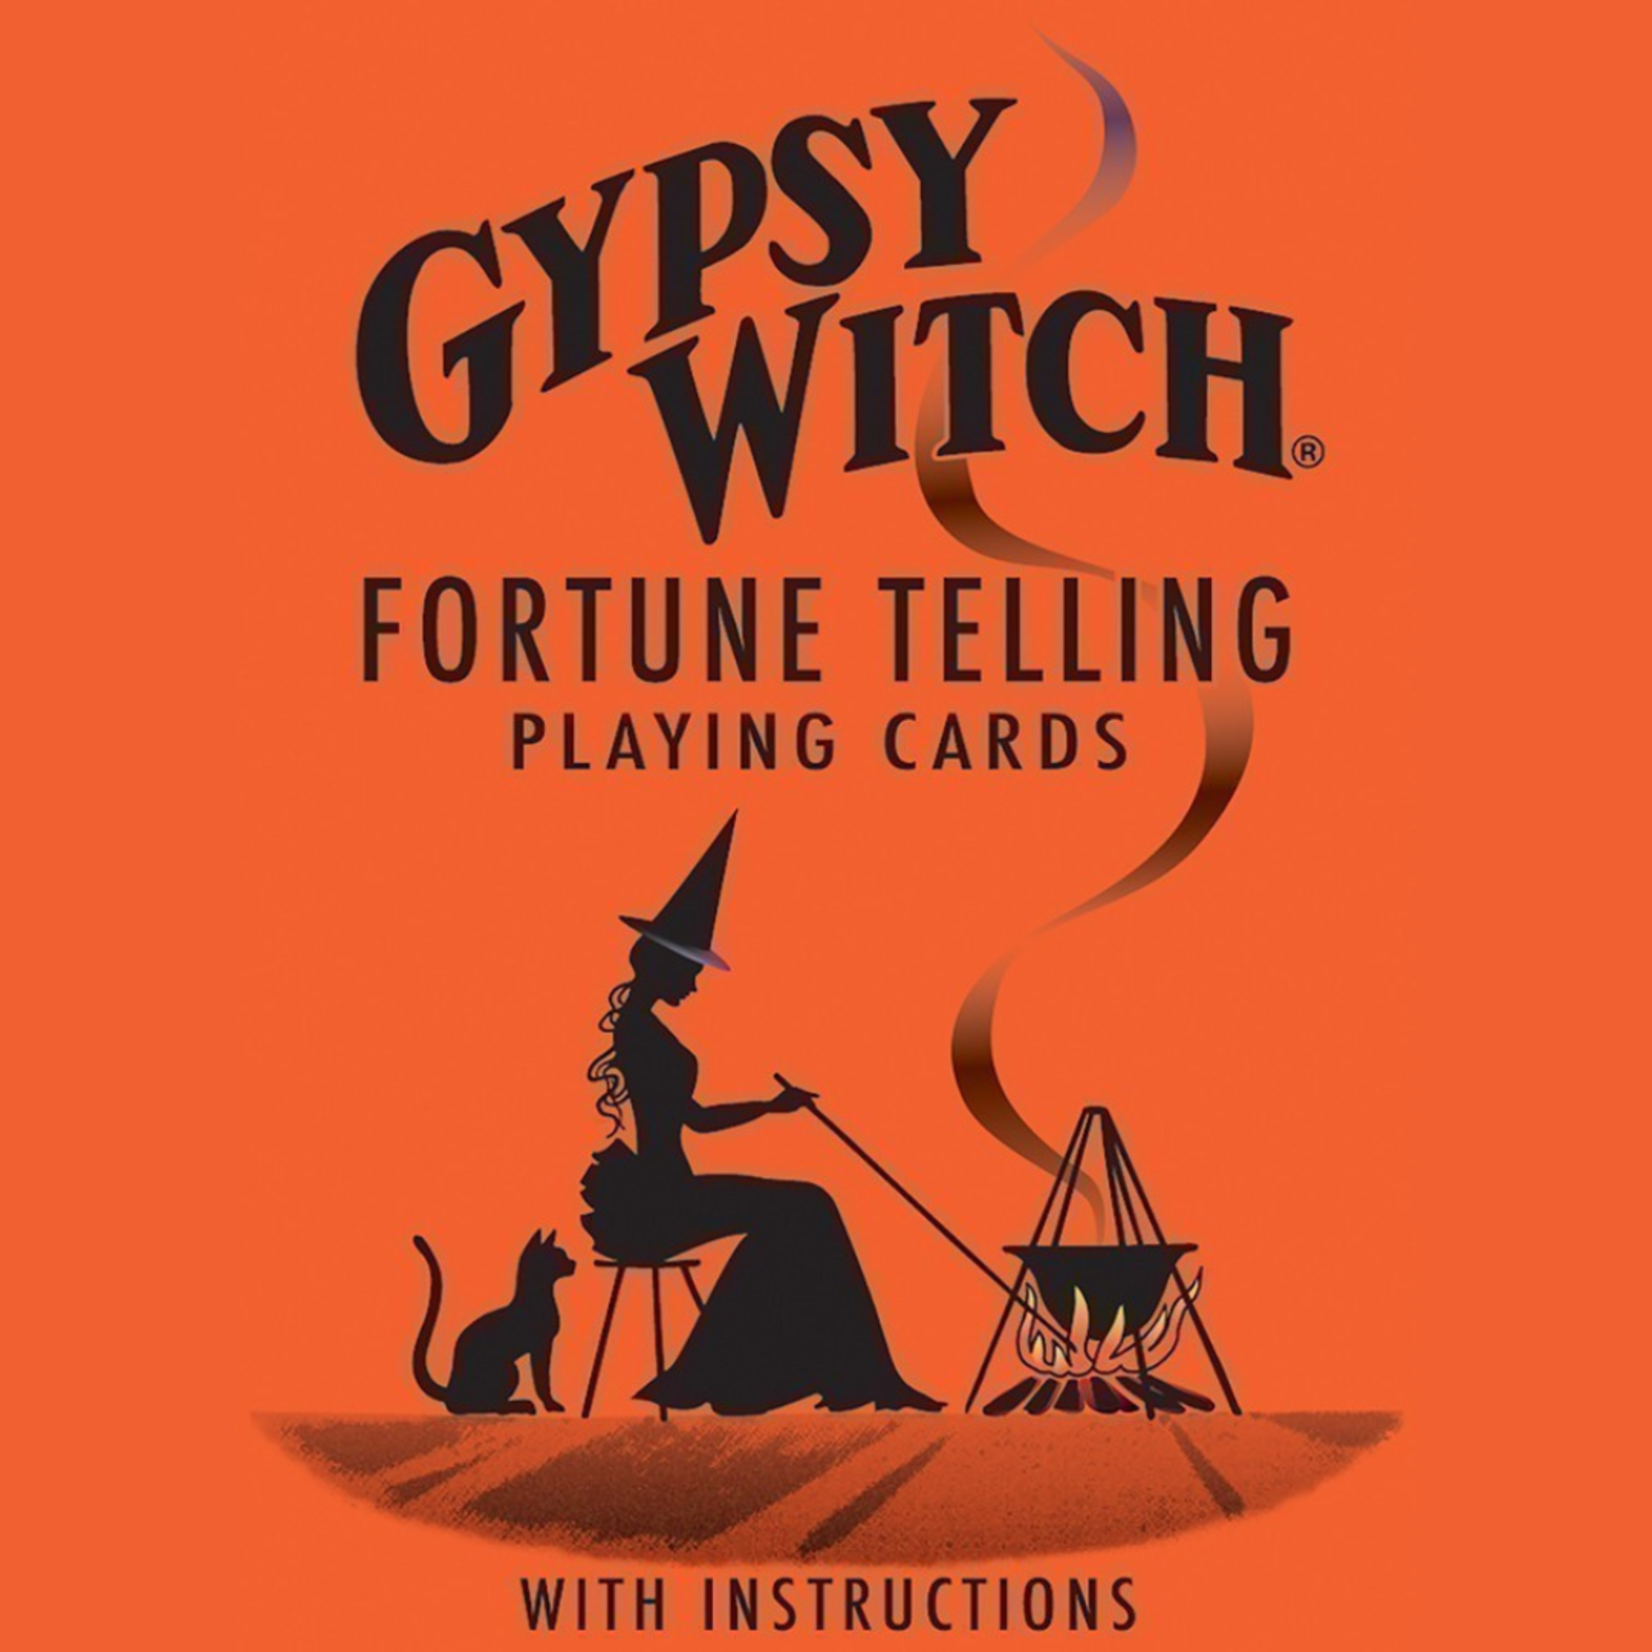 Gypsy Witchy Fortune Telling Cards